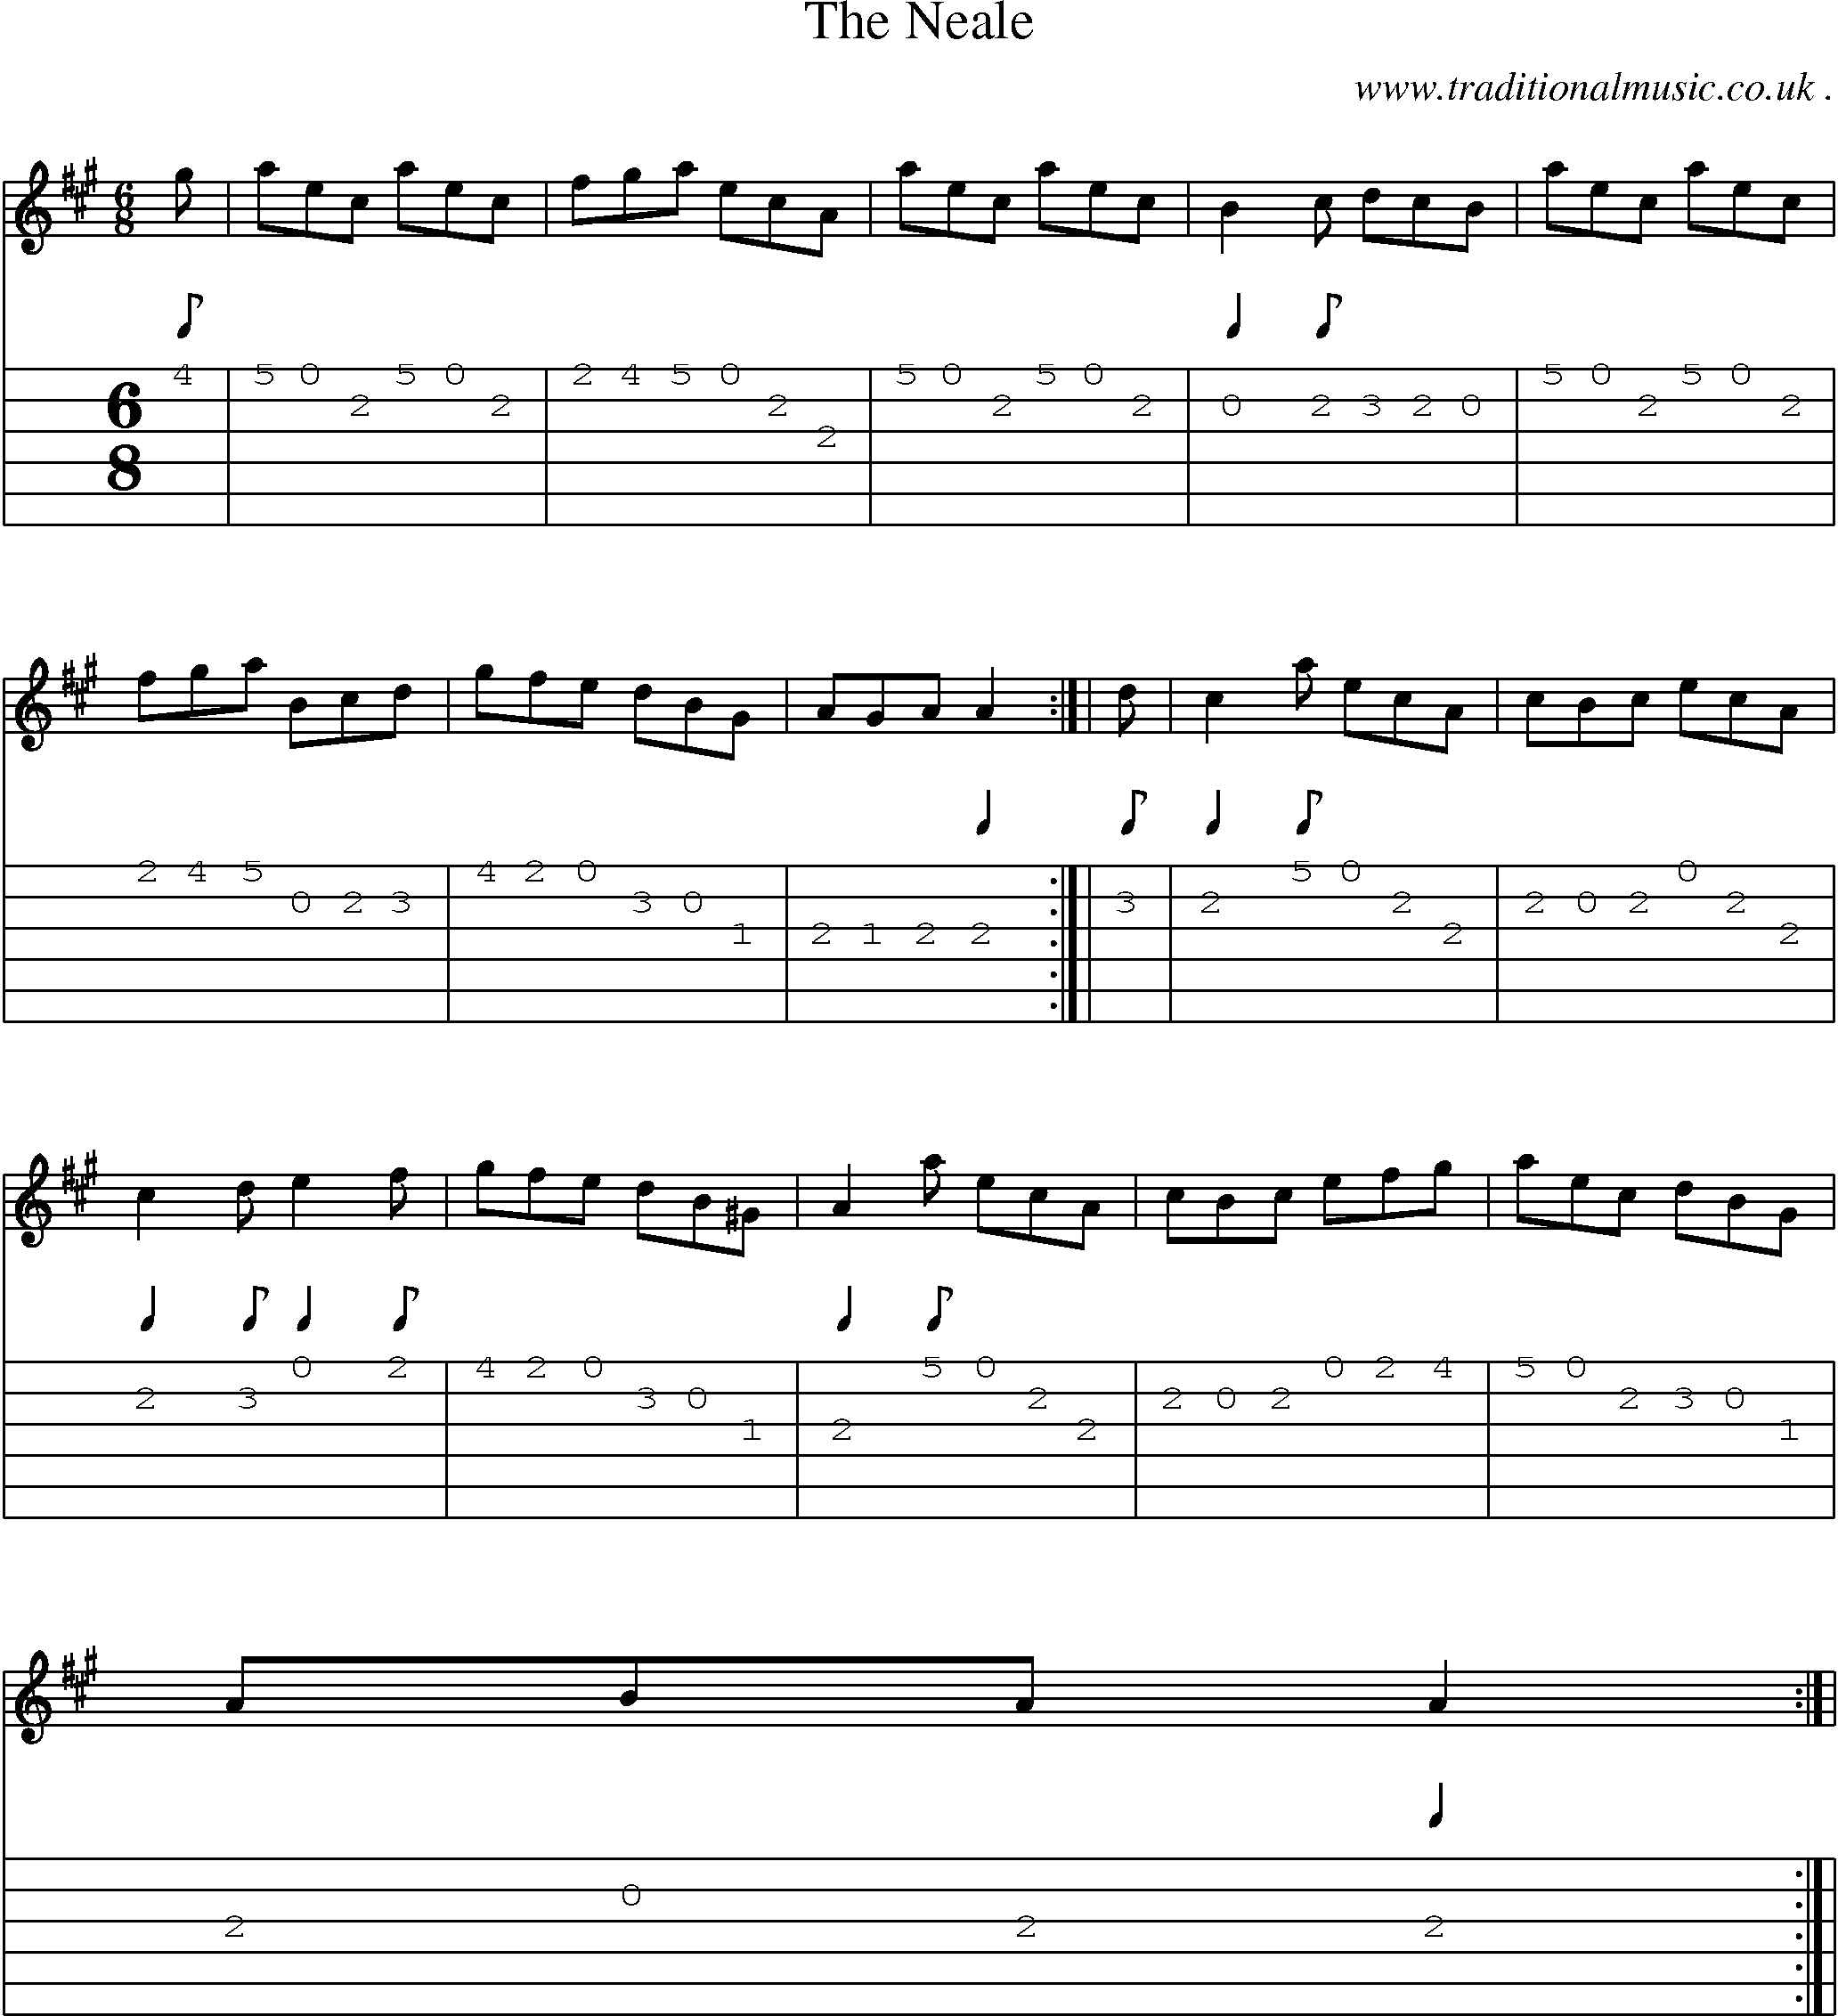 Sheet-Music and Guitar Tabs for The Neale